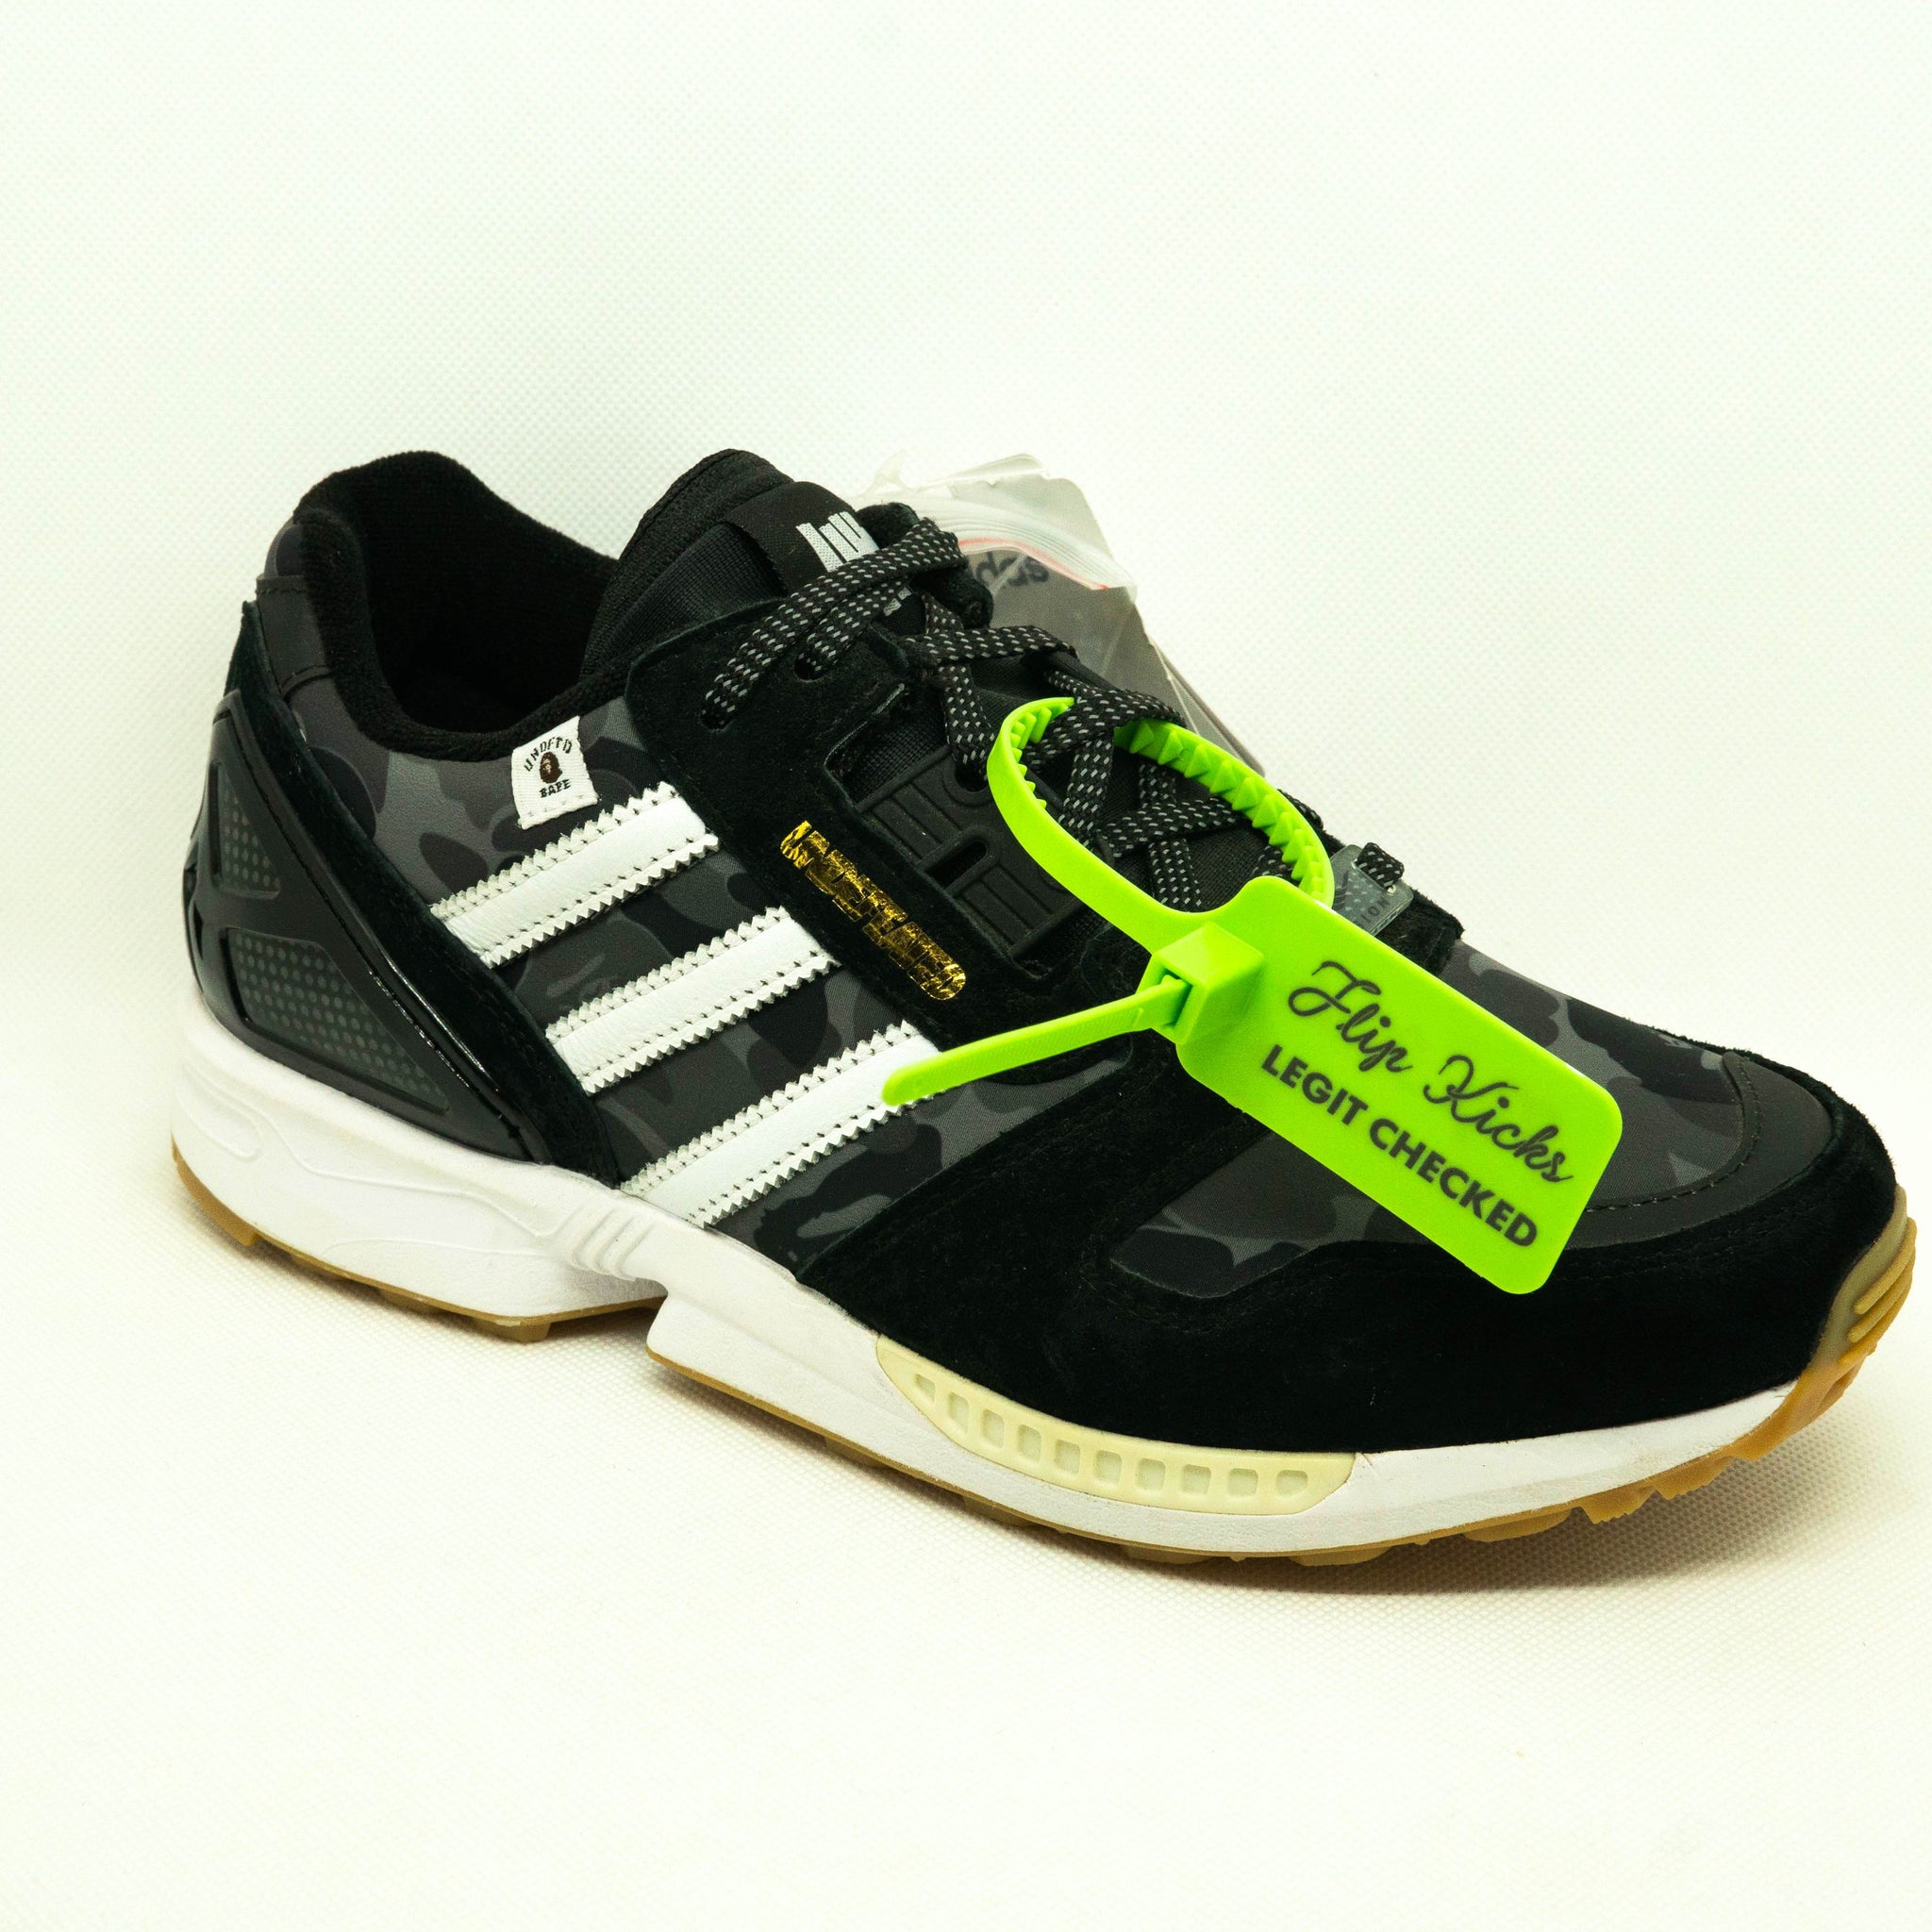 Adidas ZX 800 BAPE X UNDEFETED